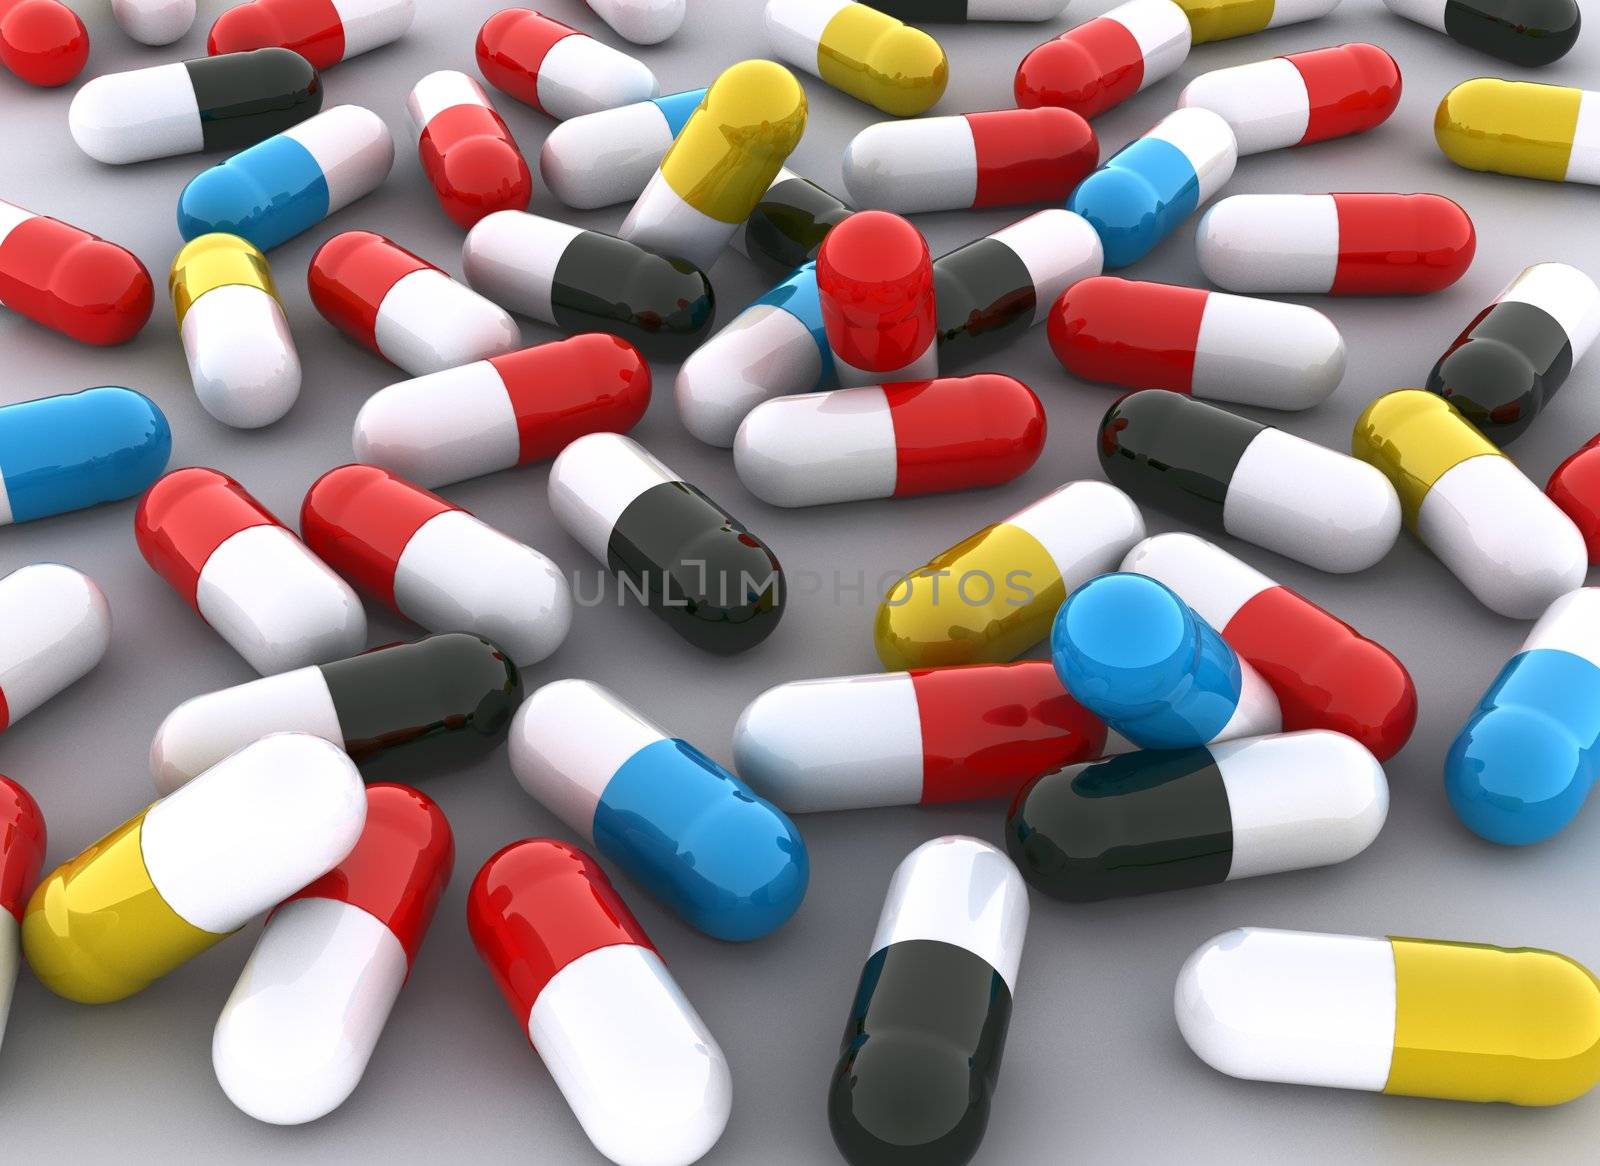 Concept of many colorful pills in red, blue, yellow, black, colors. Scene rendered on white background.